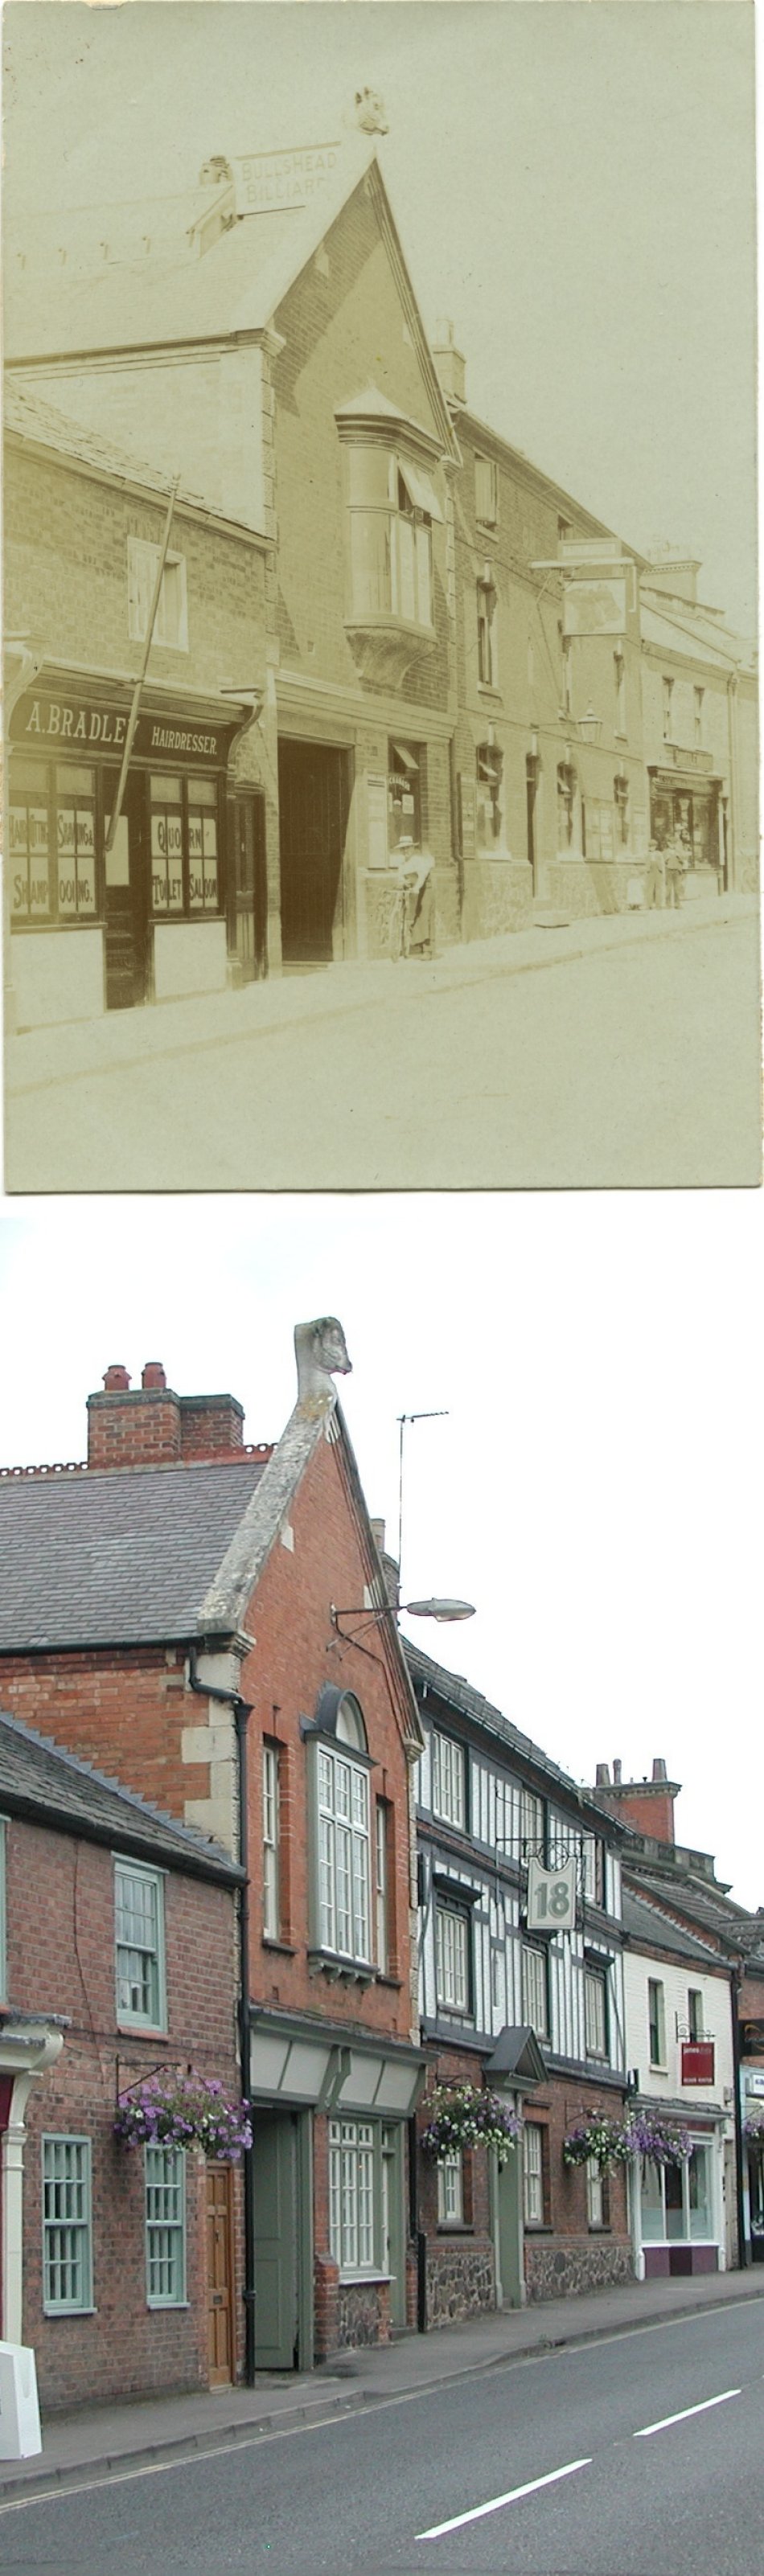 The Old Bull's Head - then and now